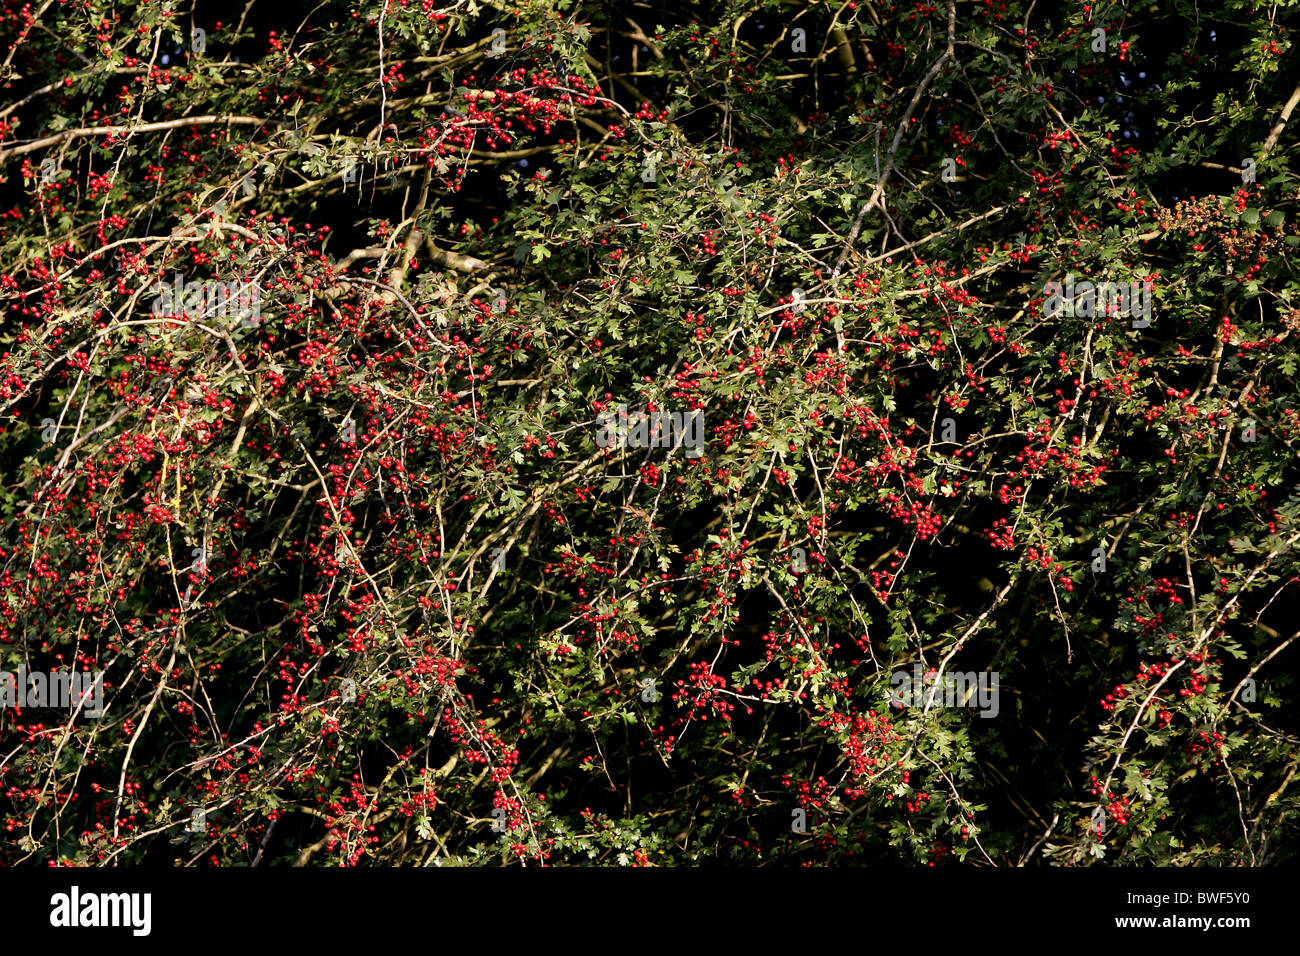 Cotoneaster shrub with lots of red berries Stock Photo